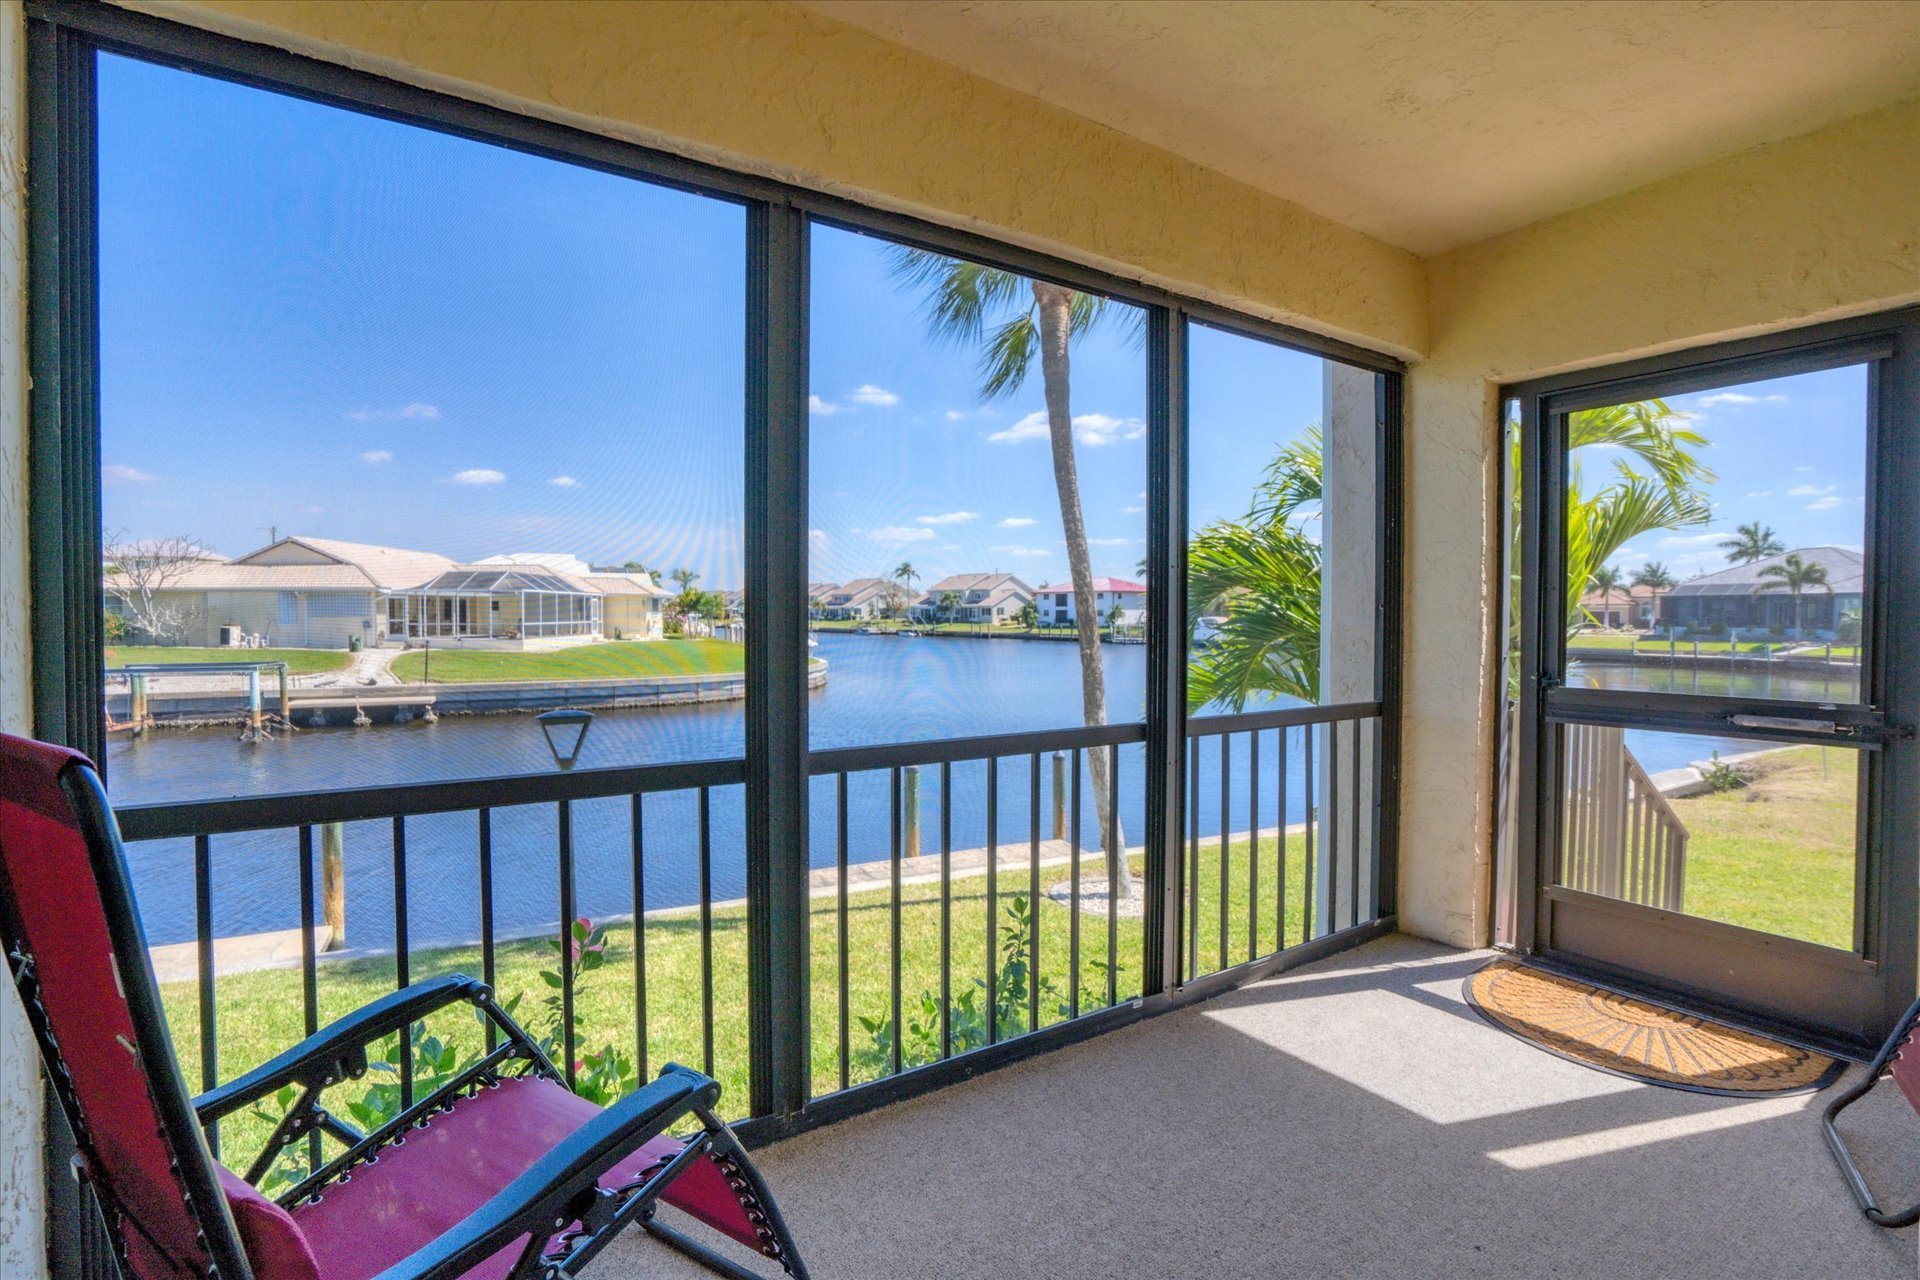 Enjoy your morning coffee on the patio with a water view